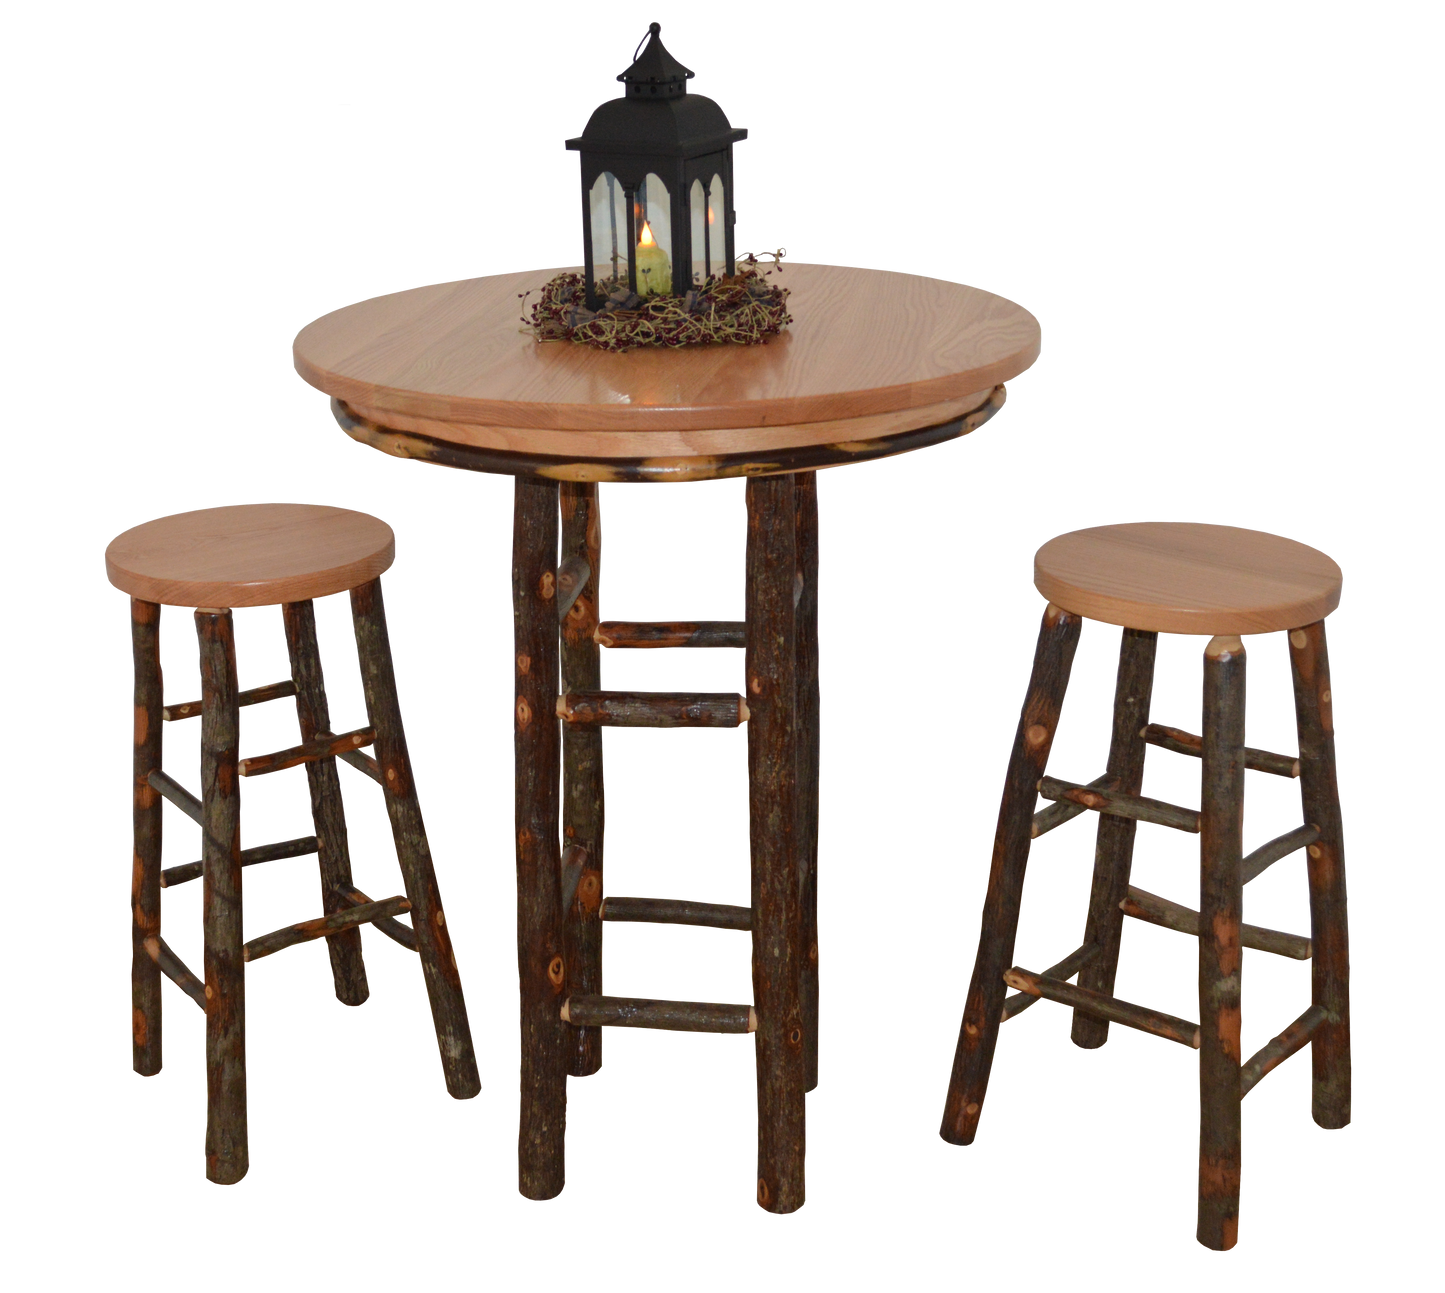 A&L Furniture Co. 33" Round Hickory Bar Table - LEAD TIME TO SHIP 10 BUSINESS DAYS